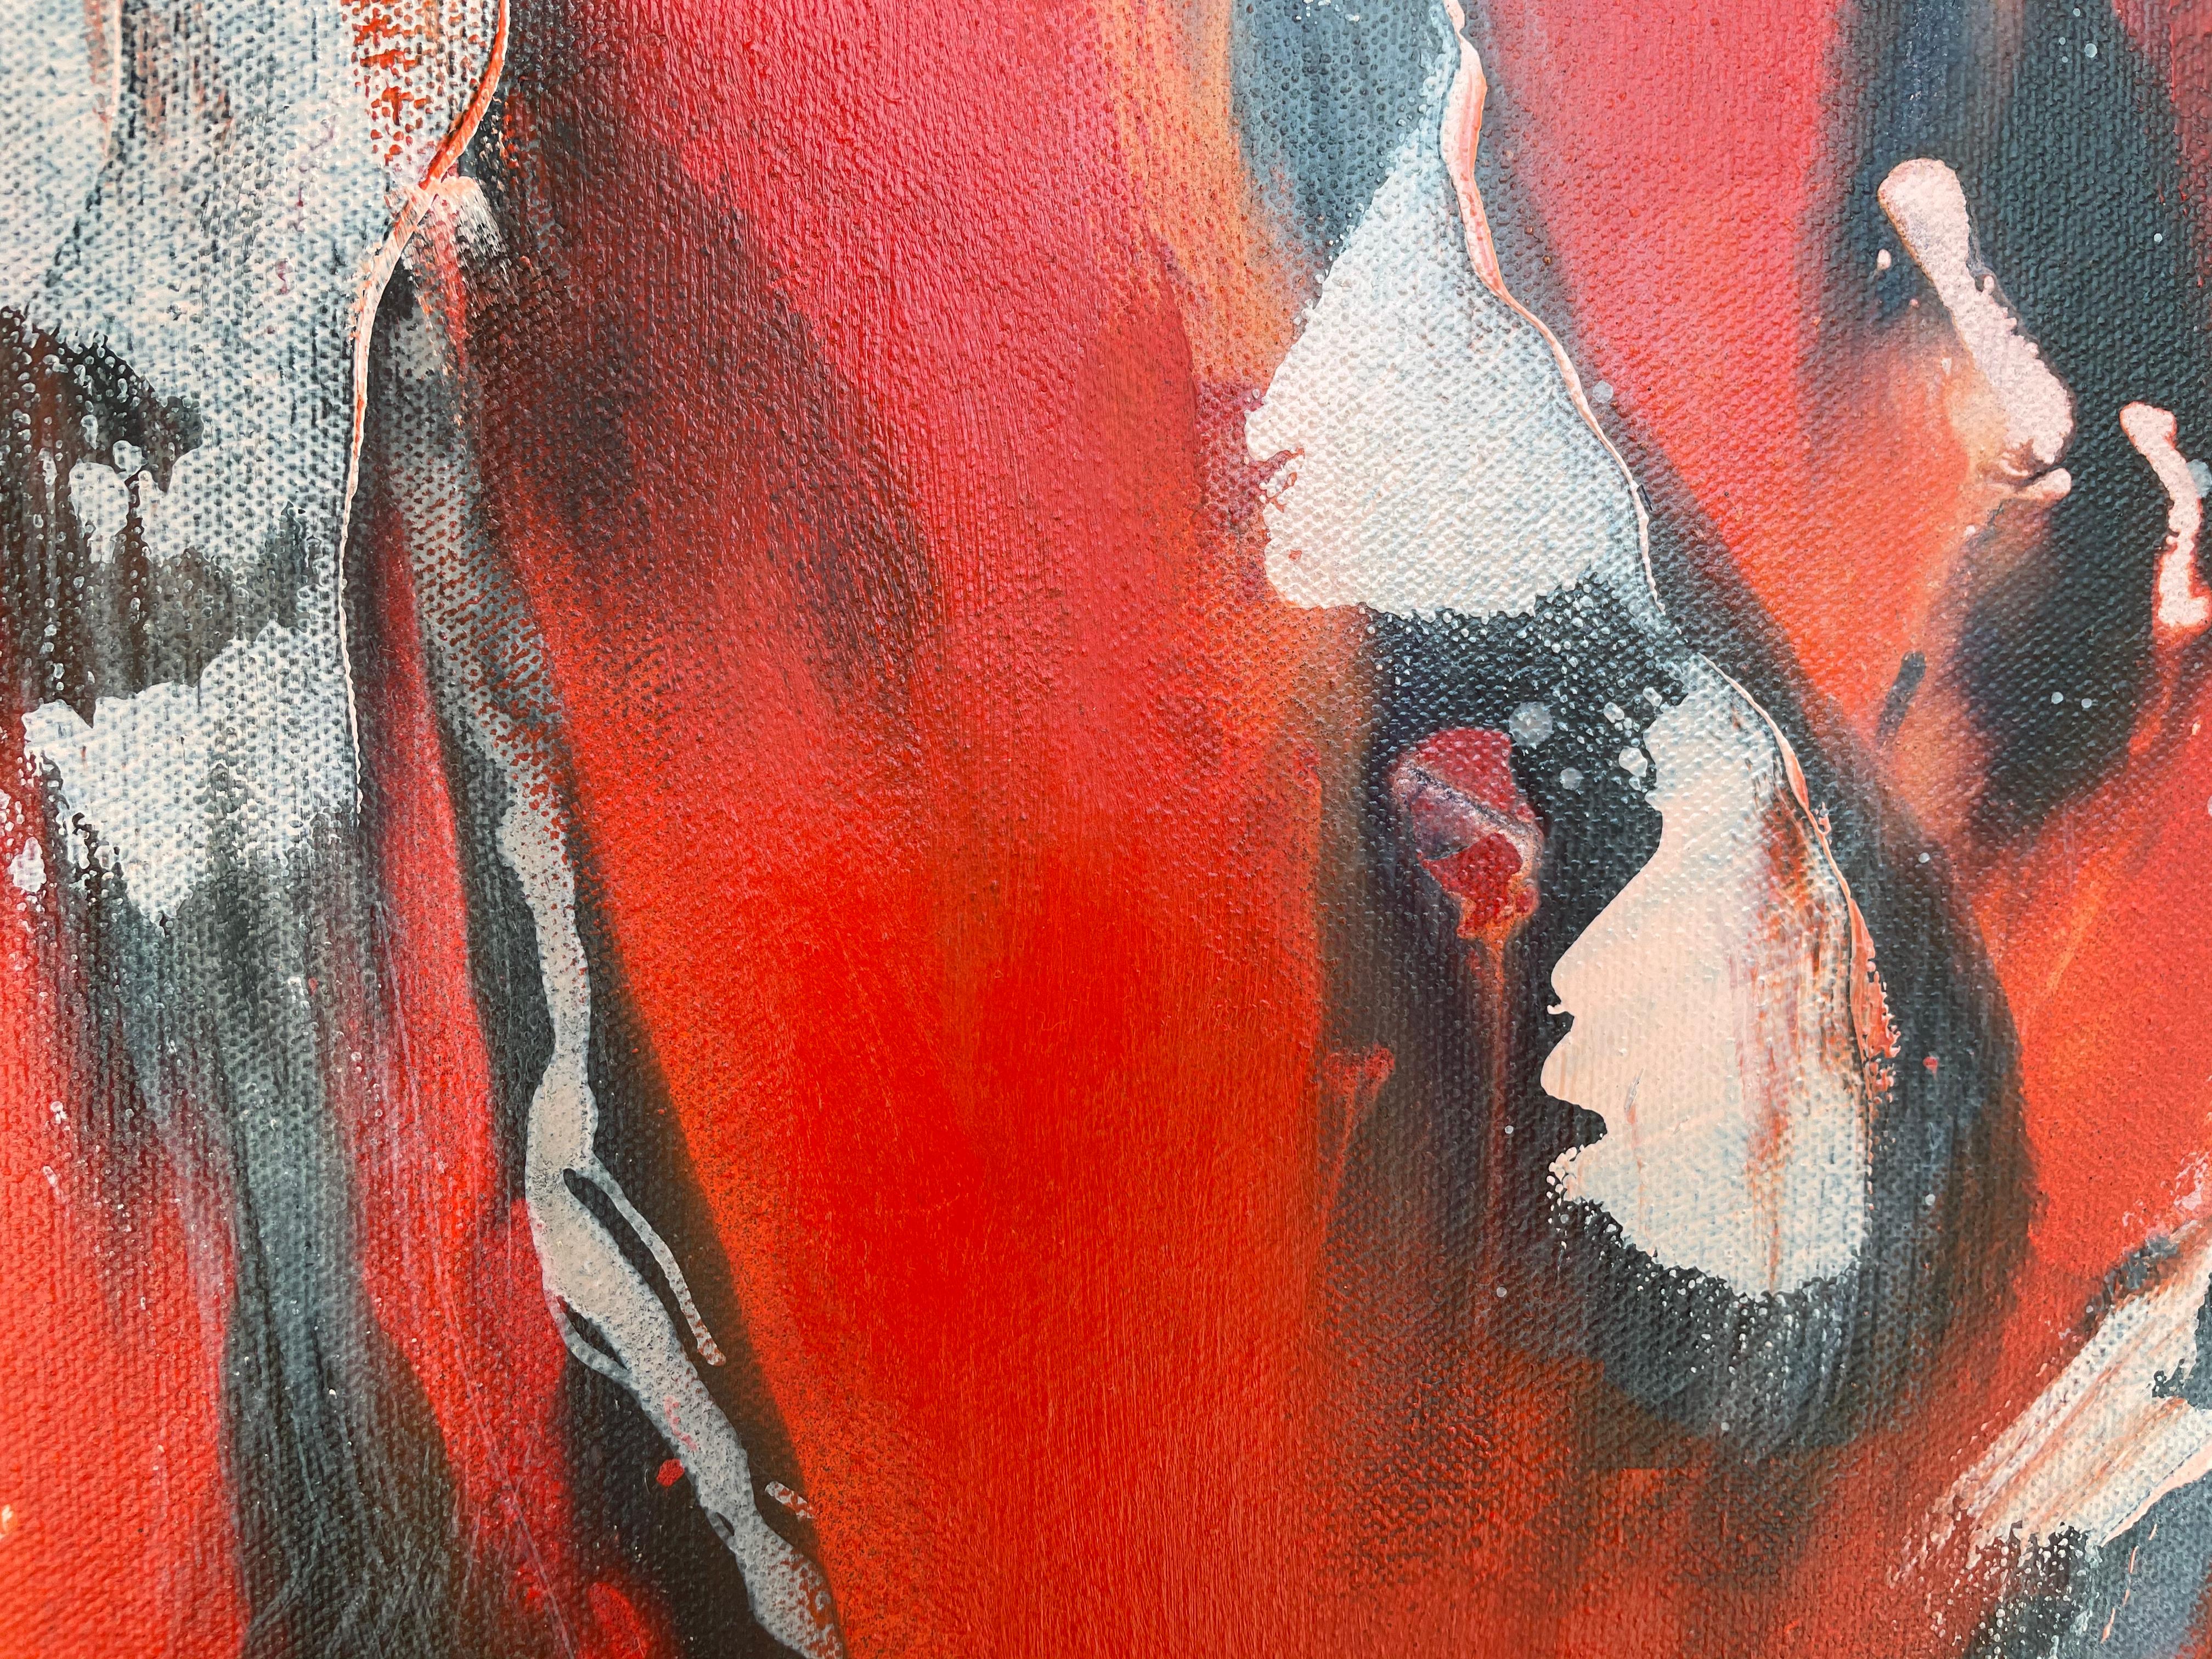 Red Is For Love - Abstract Expressionist Painting by Kirsten Poulsen 